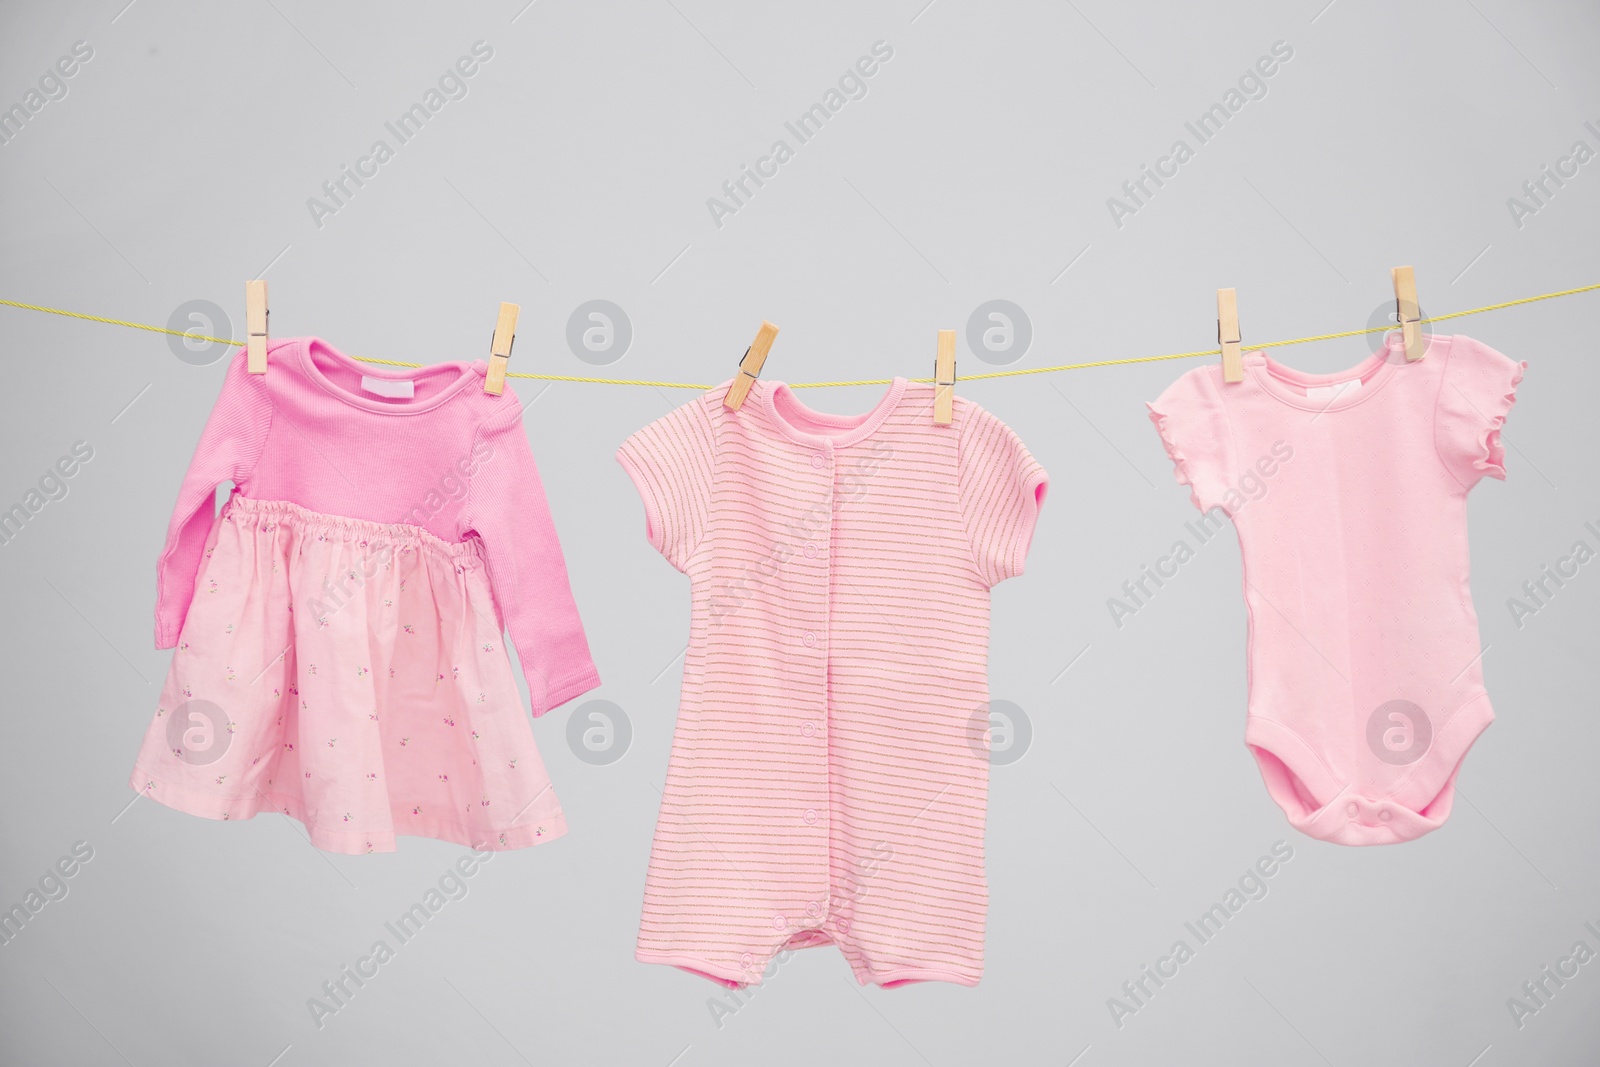 Photo of Baby clothes hanging on washing line against gray background